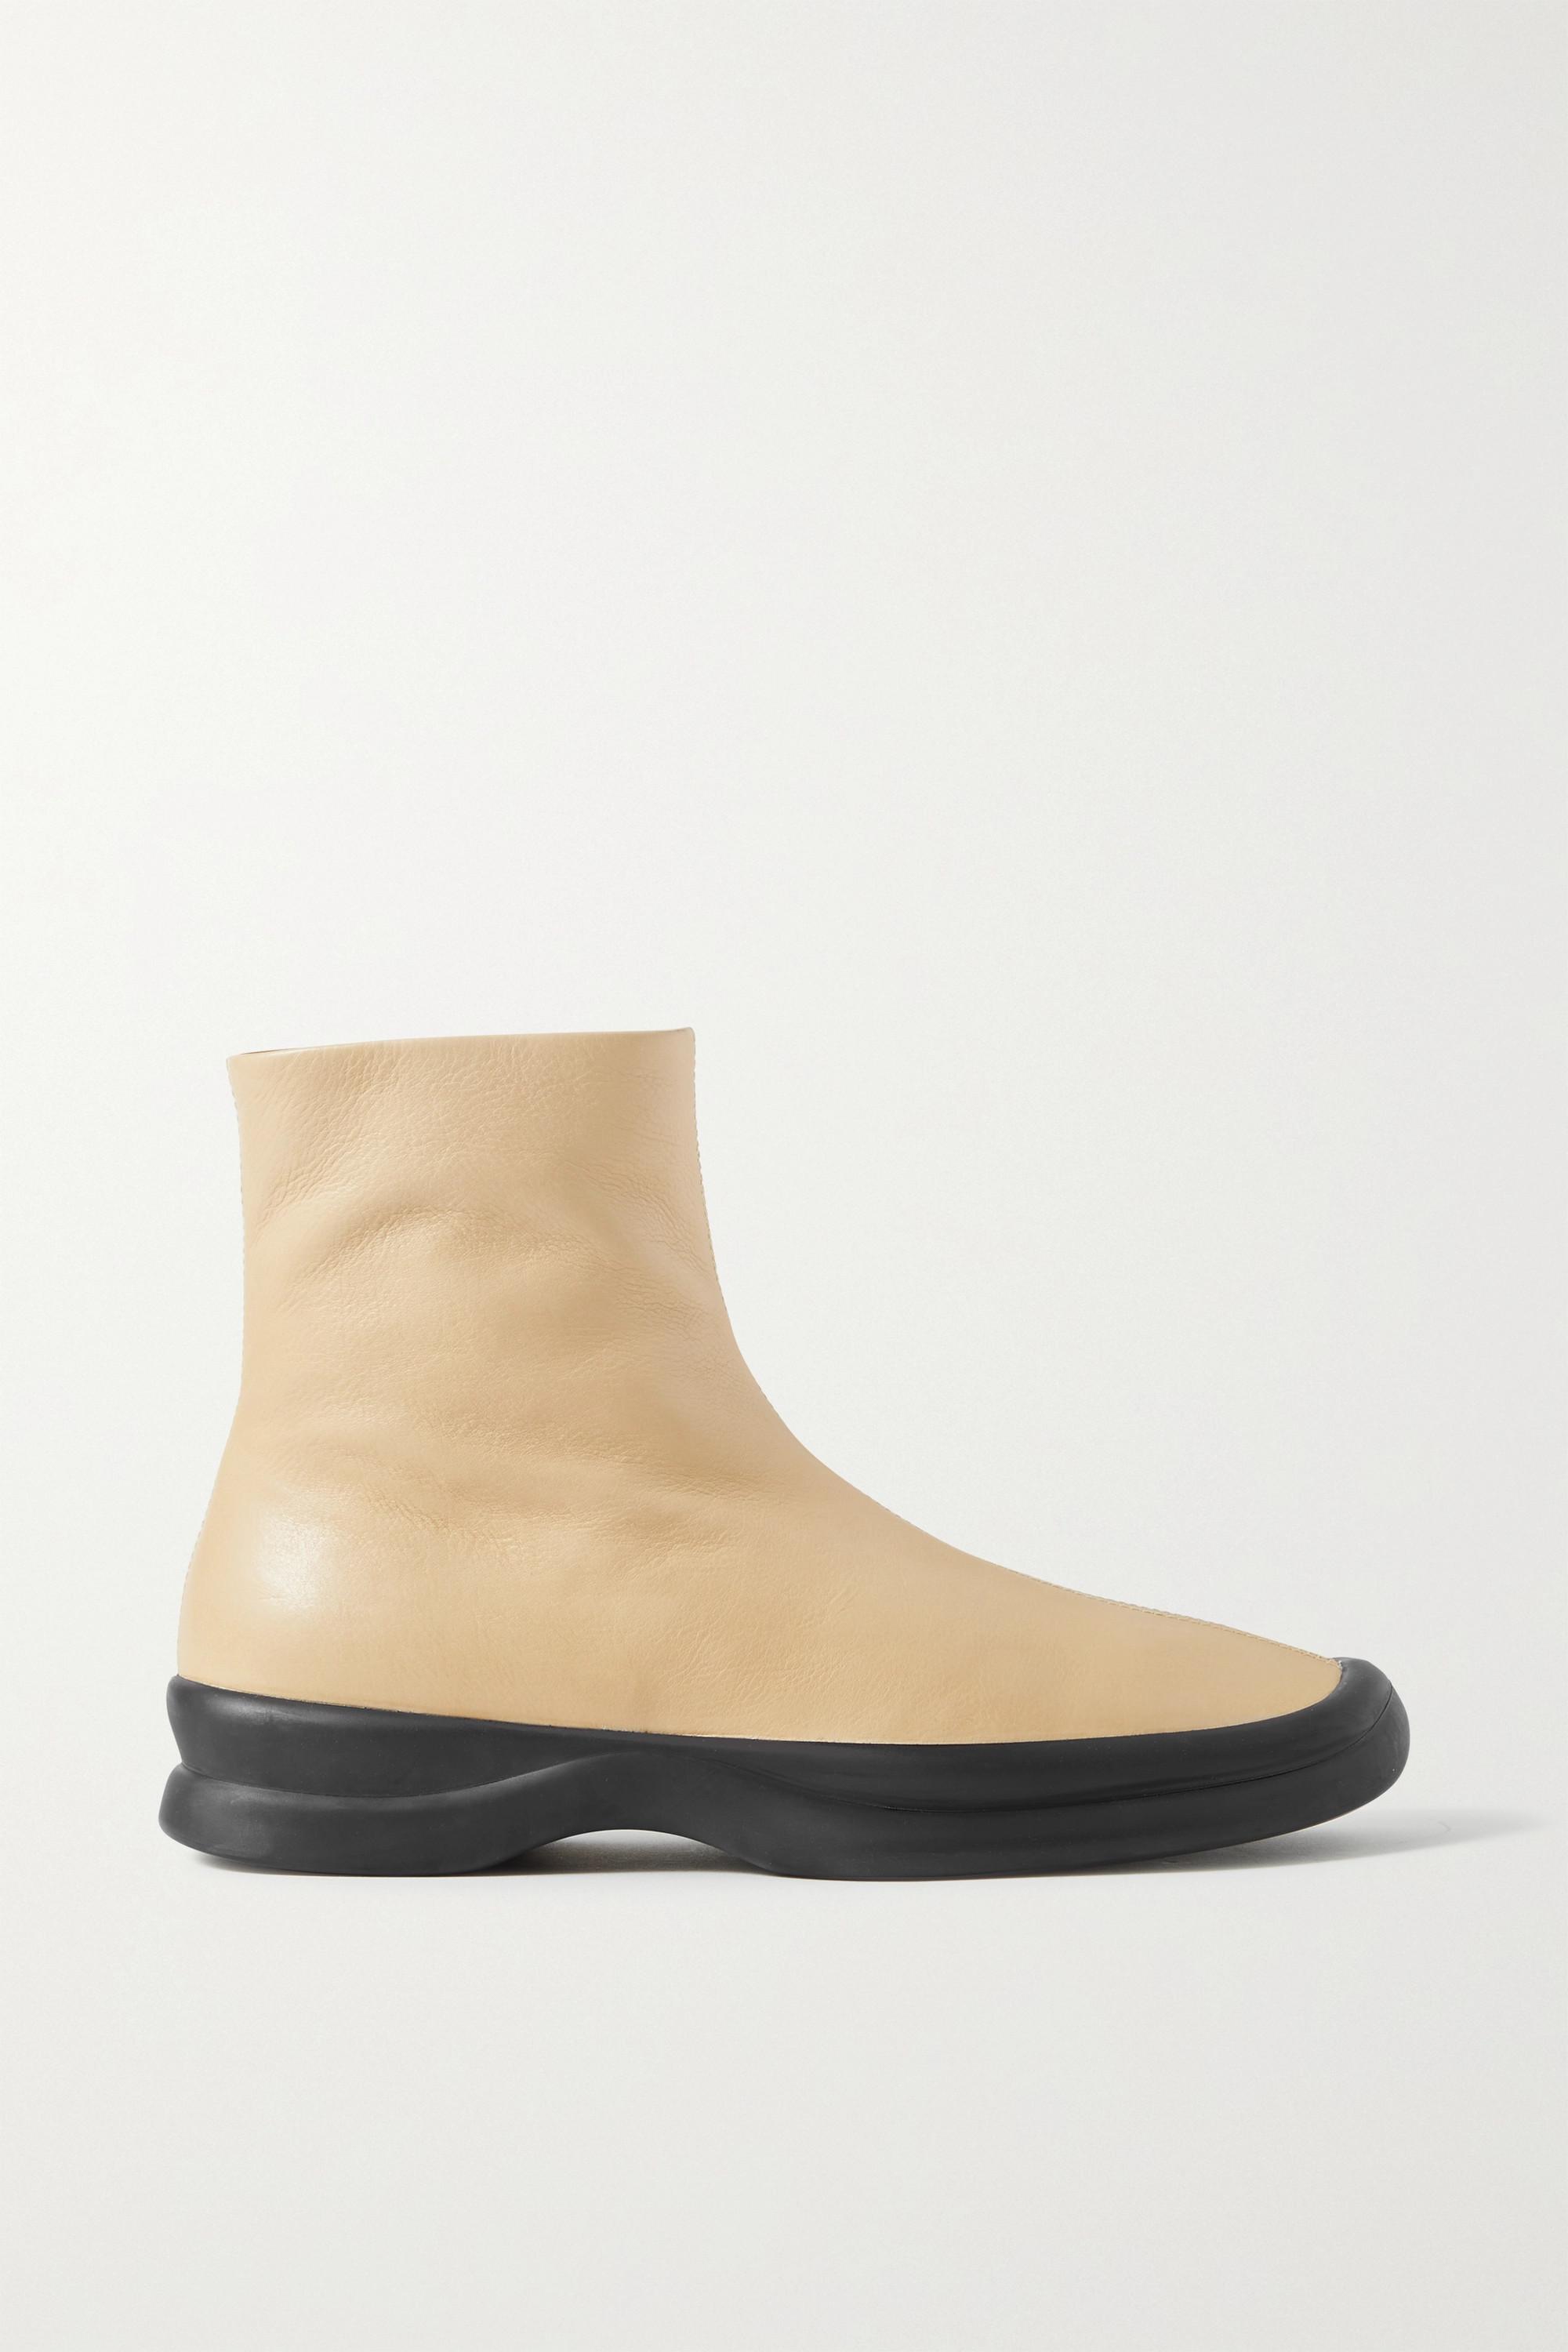 The Row Town Leather Ankle Boots in Natural - Lyst